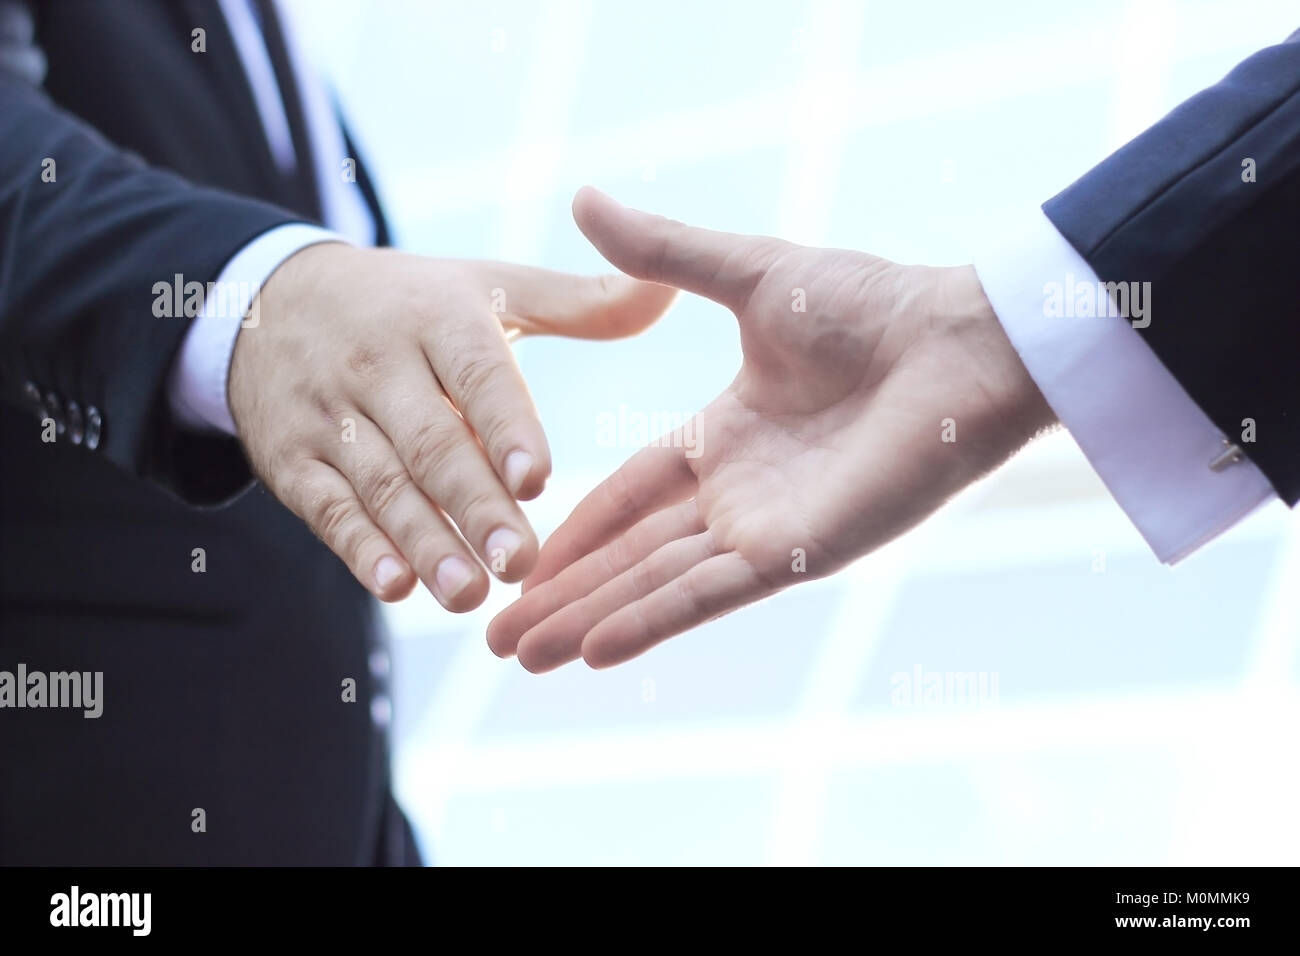 image of a firm handshake Stock Photo